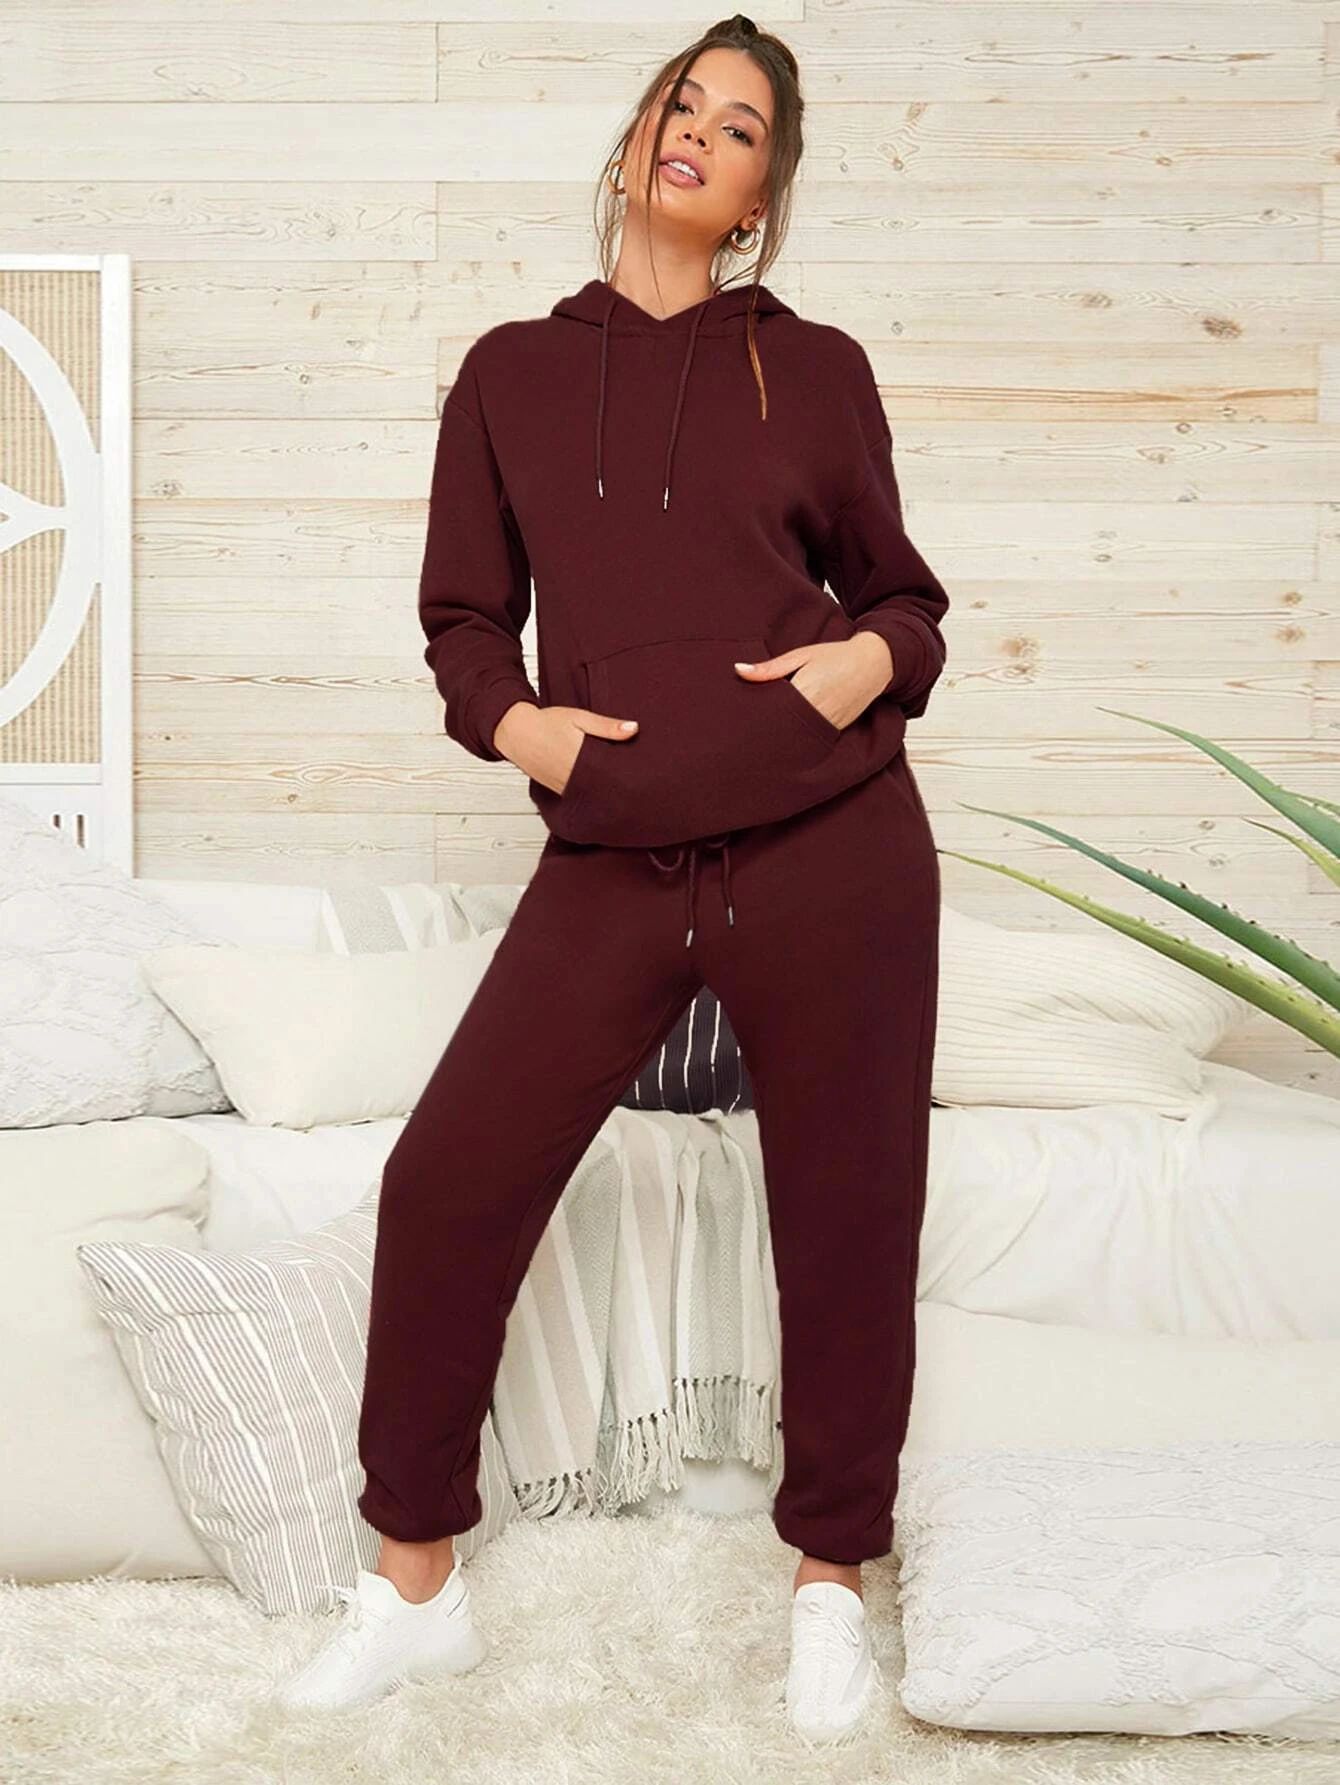 SHEIN Pocket Front Hoodie and Sweatpants Set | SHEIN